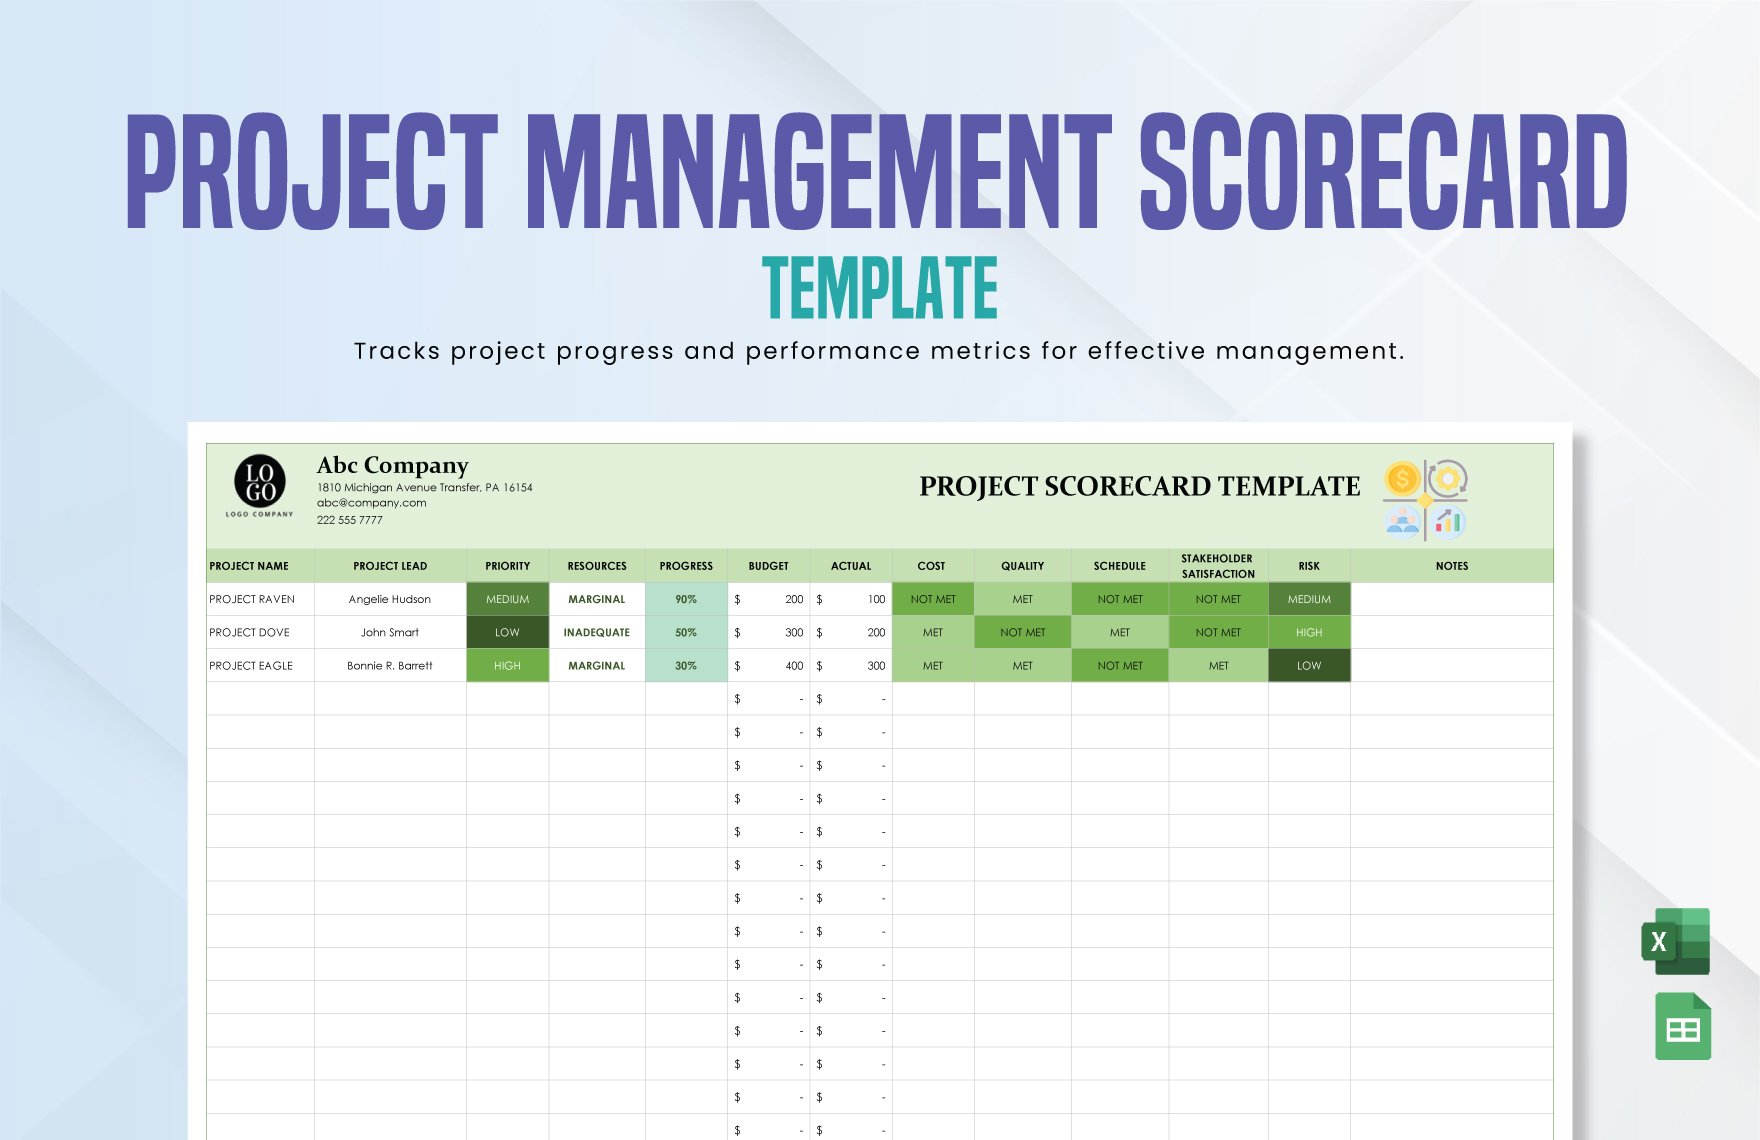 Project Management Scorecard Template in Excel, Google Sheets